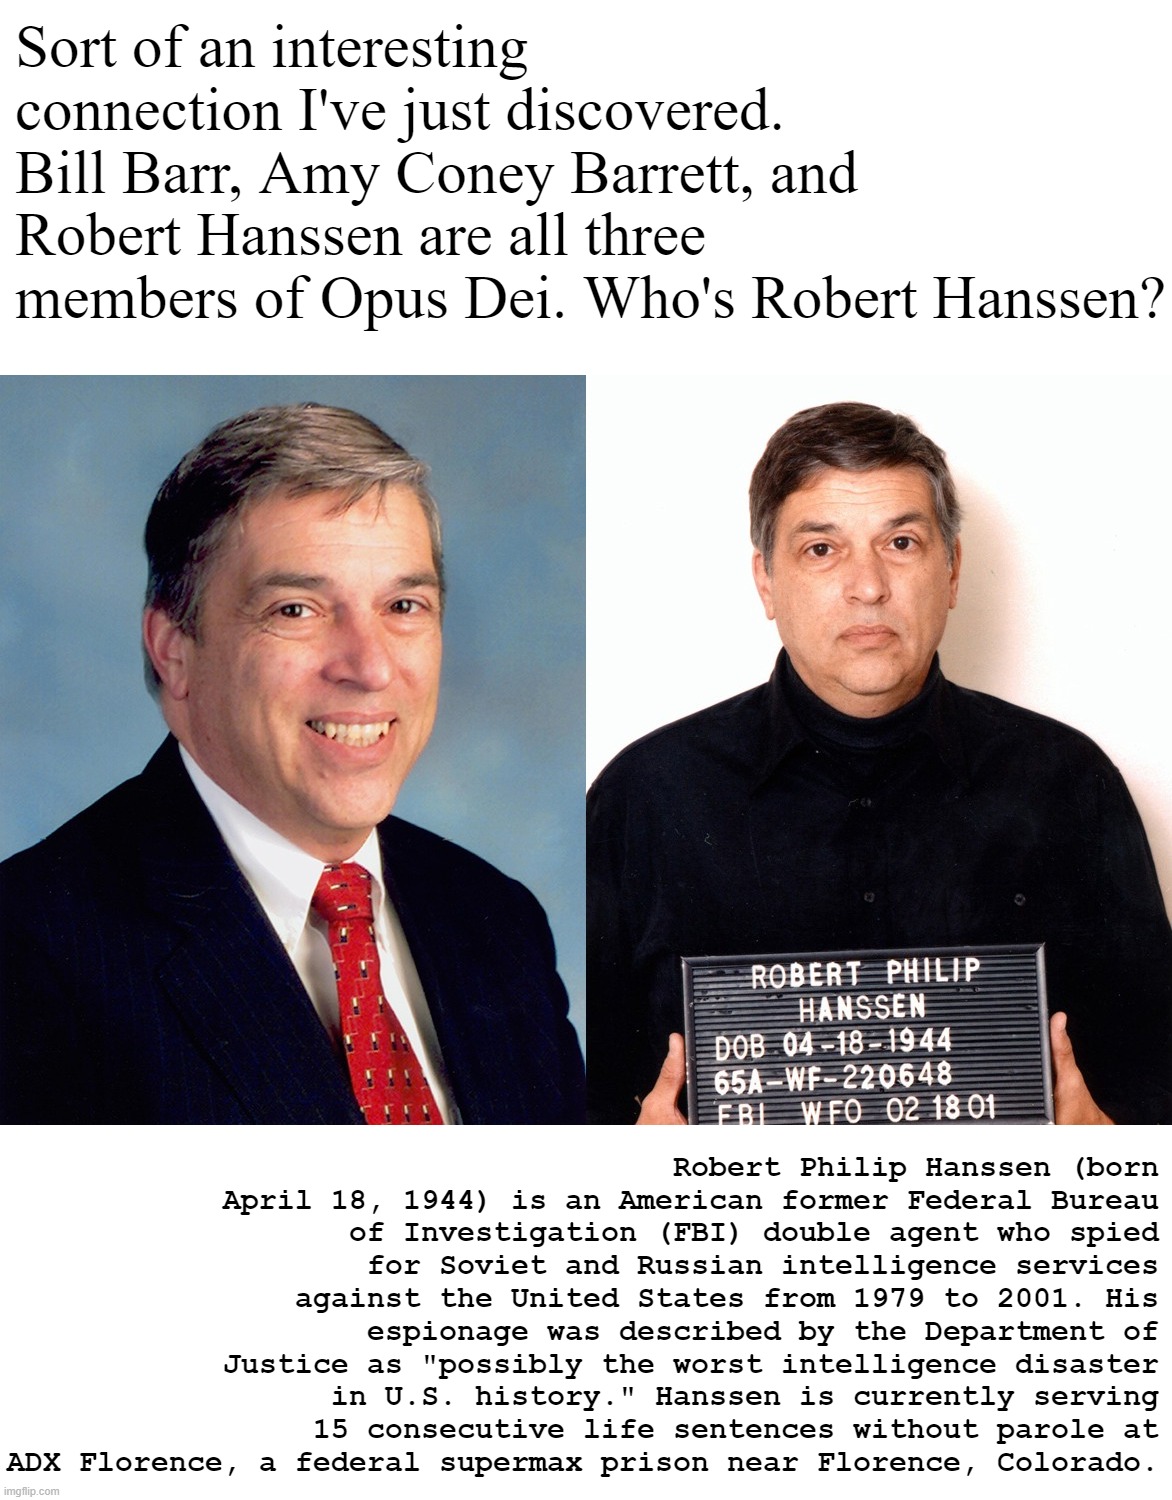 Opus Dei: an arm of the Catholic Church whose members seek personal holiness and to imbue their work with Christian principles. | Sort of an interesting connection I've just discovered. Bill Barr, Amy Coney Barrett, and Robert Hanssen are all three members of Opus Dei. Who's Robert Hanssen? Robert Philip Hanssen (born April 18, 1944) is an American former Federal Bureau of Investigation (FBI) double agent who spied for Soviet and Russian intelligence services against the United States from 1979 to 2001. His espionage was described by the Department of Justice as "possibly the worst intelligence disaster in U.S. history." Hanssen is currently serving 15 consecutive life sentences without parole at ADX Florence, a federal supermax prison near Florence, Colorado. | image tagged in robert hanssen traitor,traitor,treason,catholic,catholicism,catholic church | made w/ Imgflip meme maker